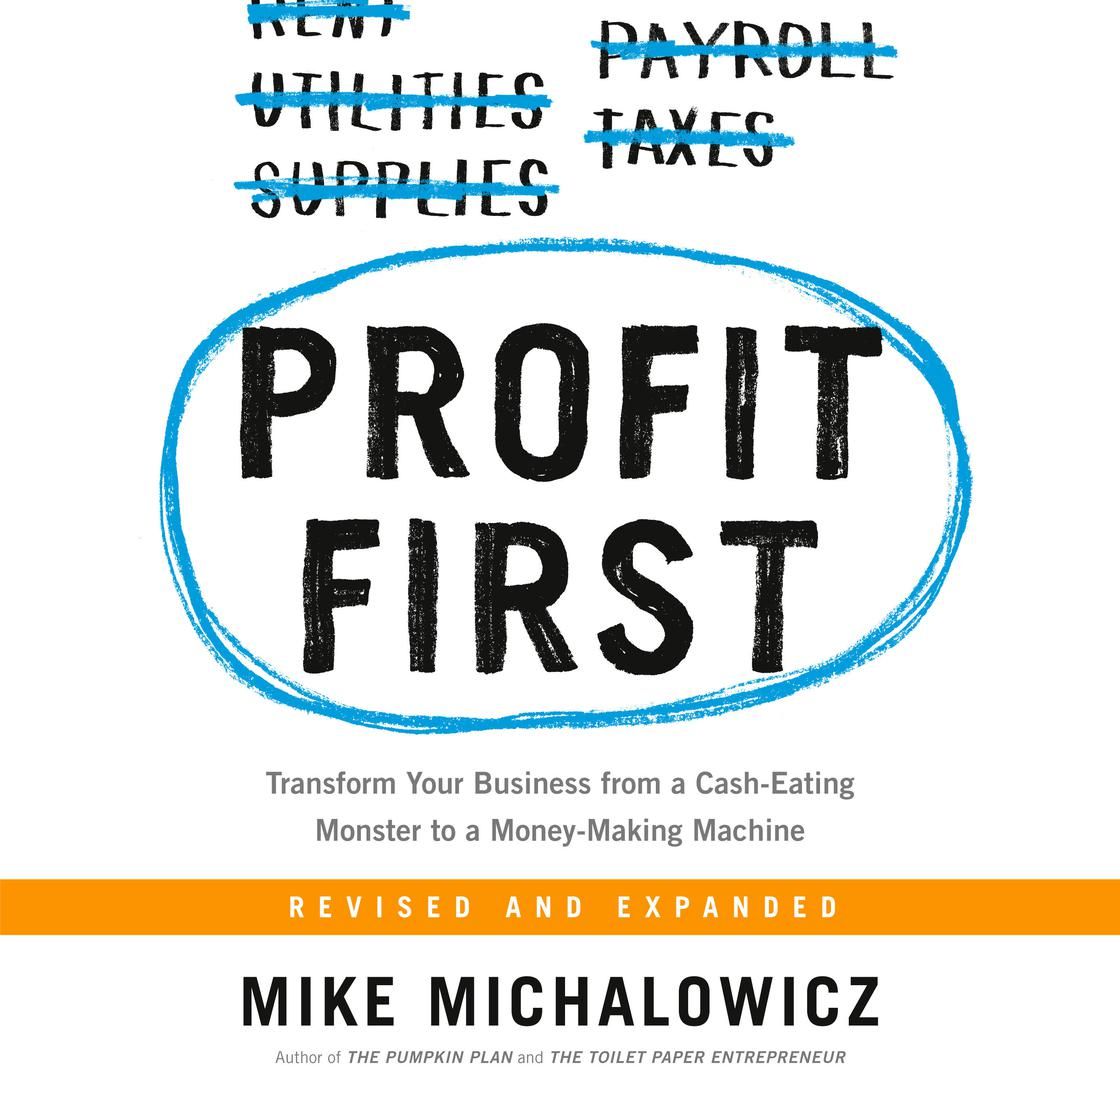 Profit First
            Transform Your Business from a Cash-Eating Monster to a Money-Making Mac... | Libro.fm (US)